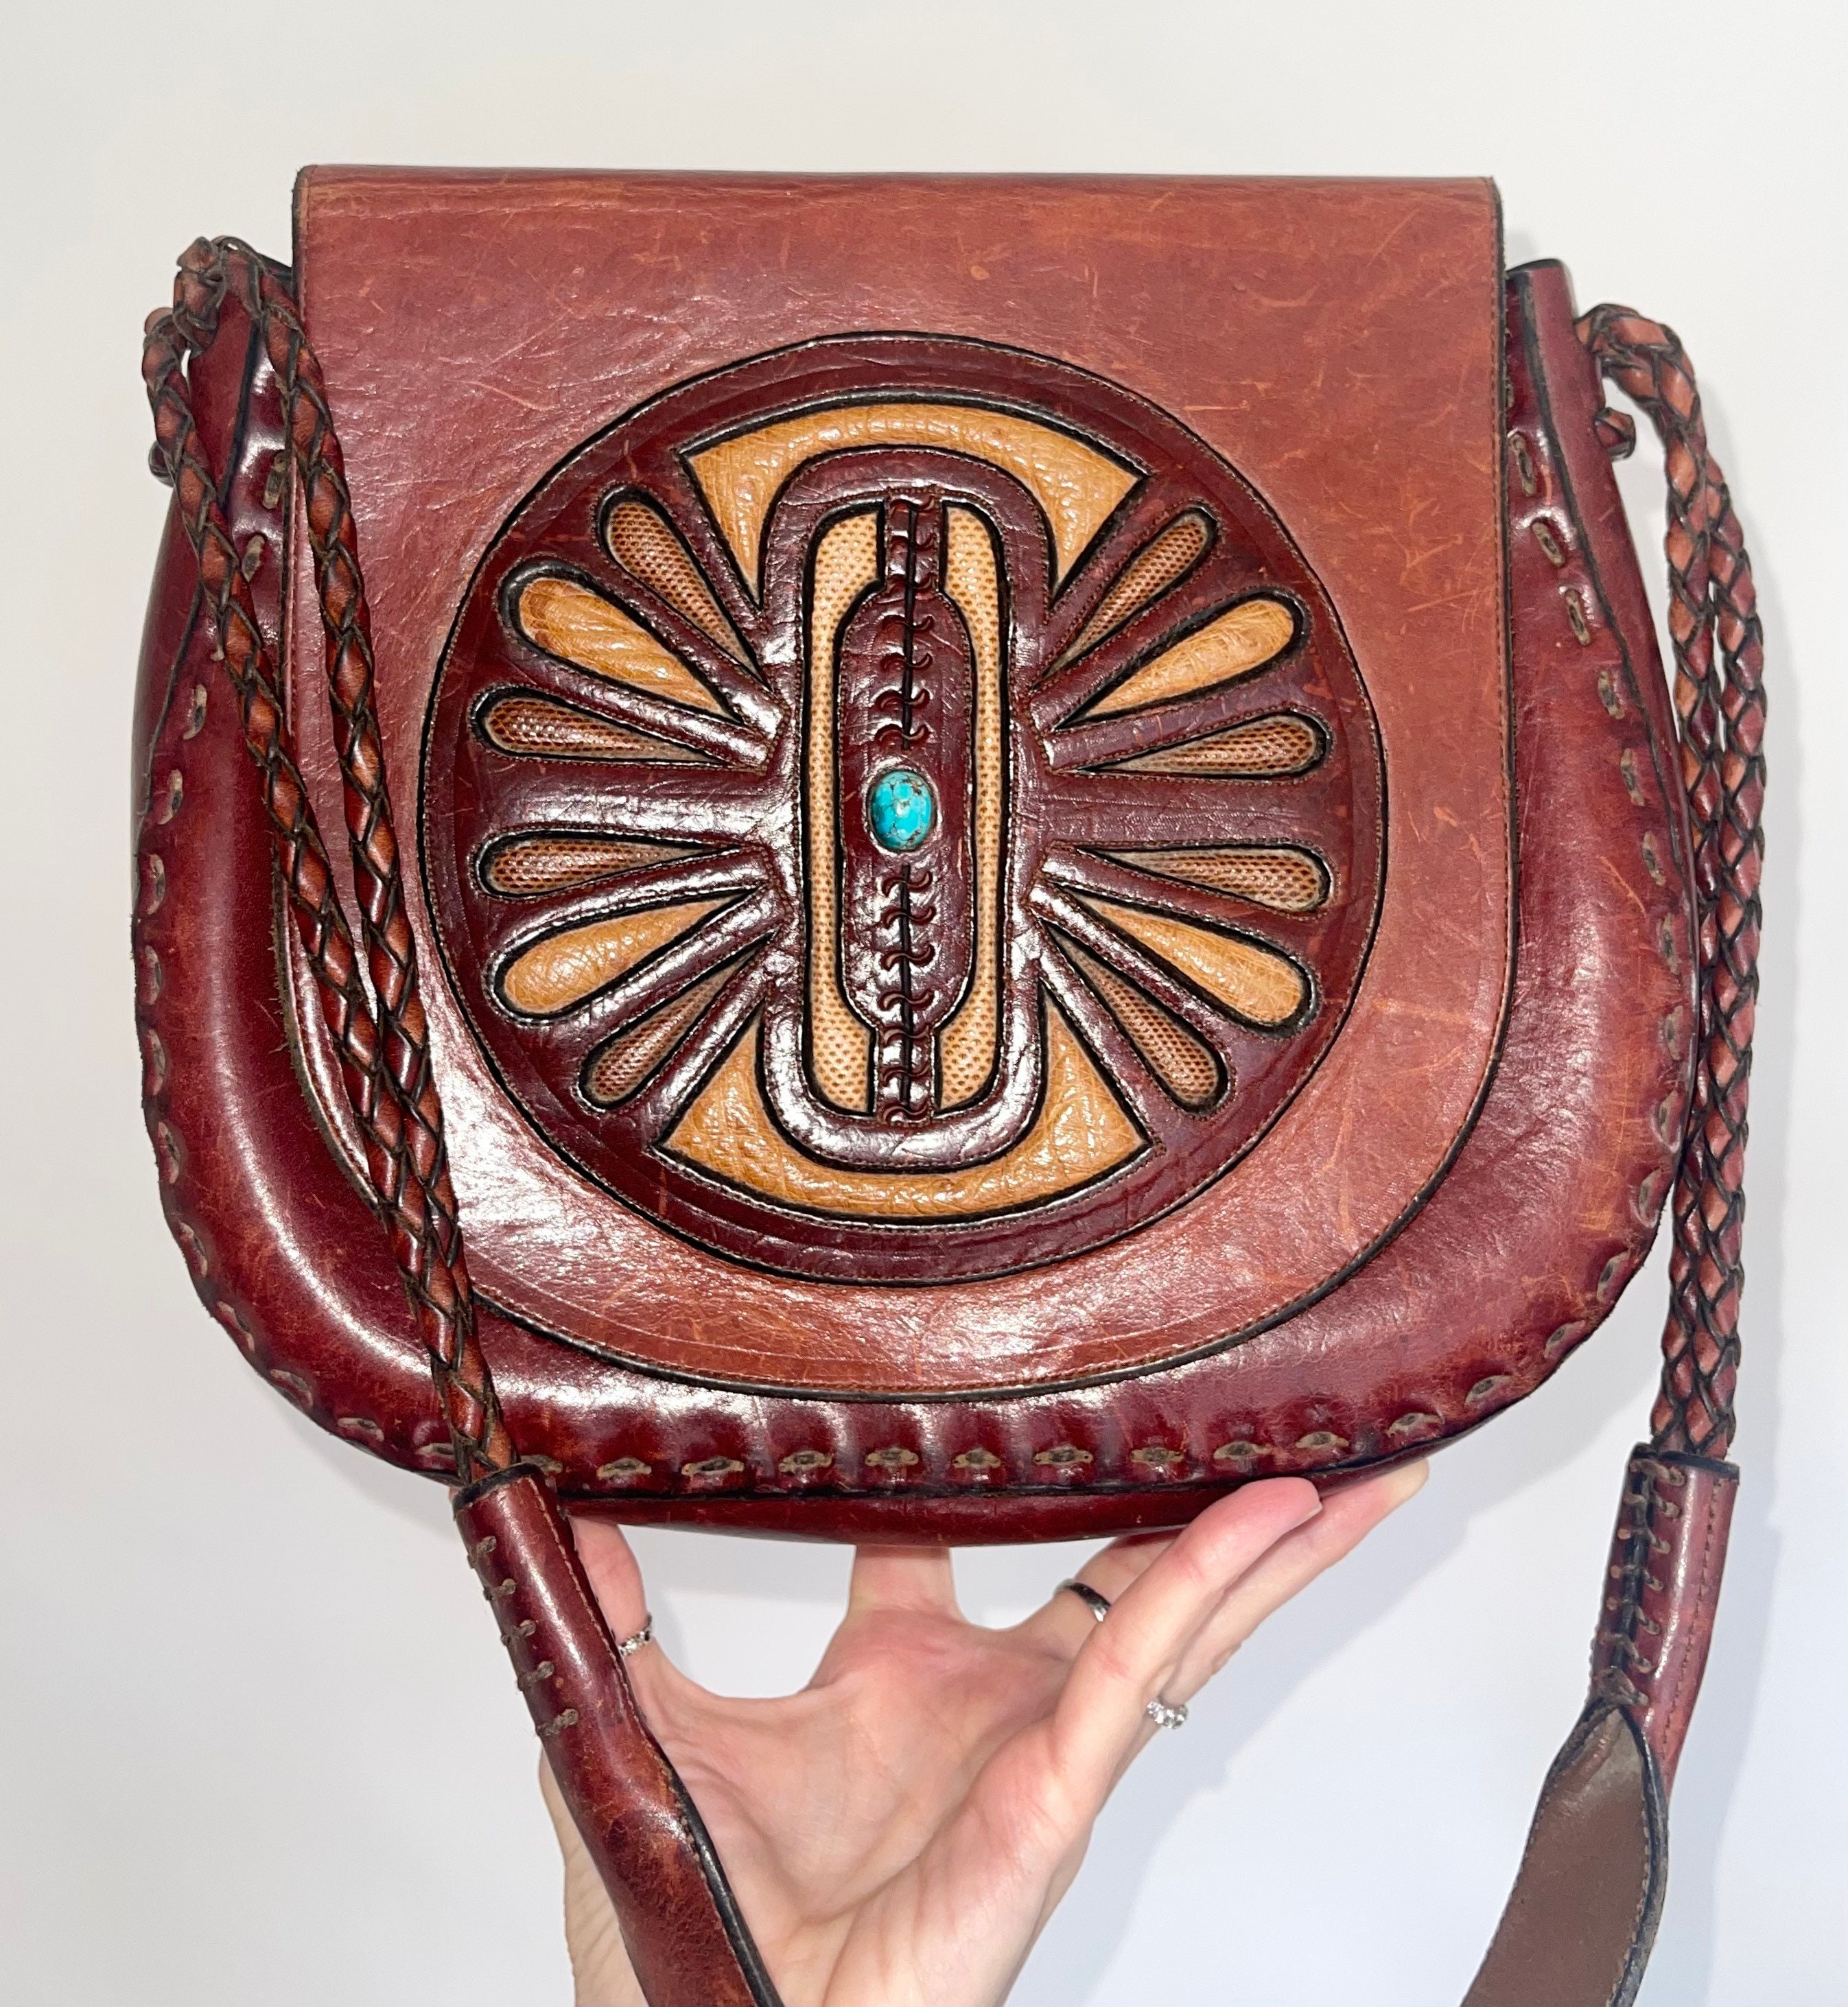 Rare Western Leather Bag Saddle Bag Purse Vintage 70's Wyly's Leather ...